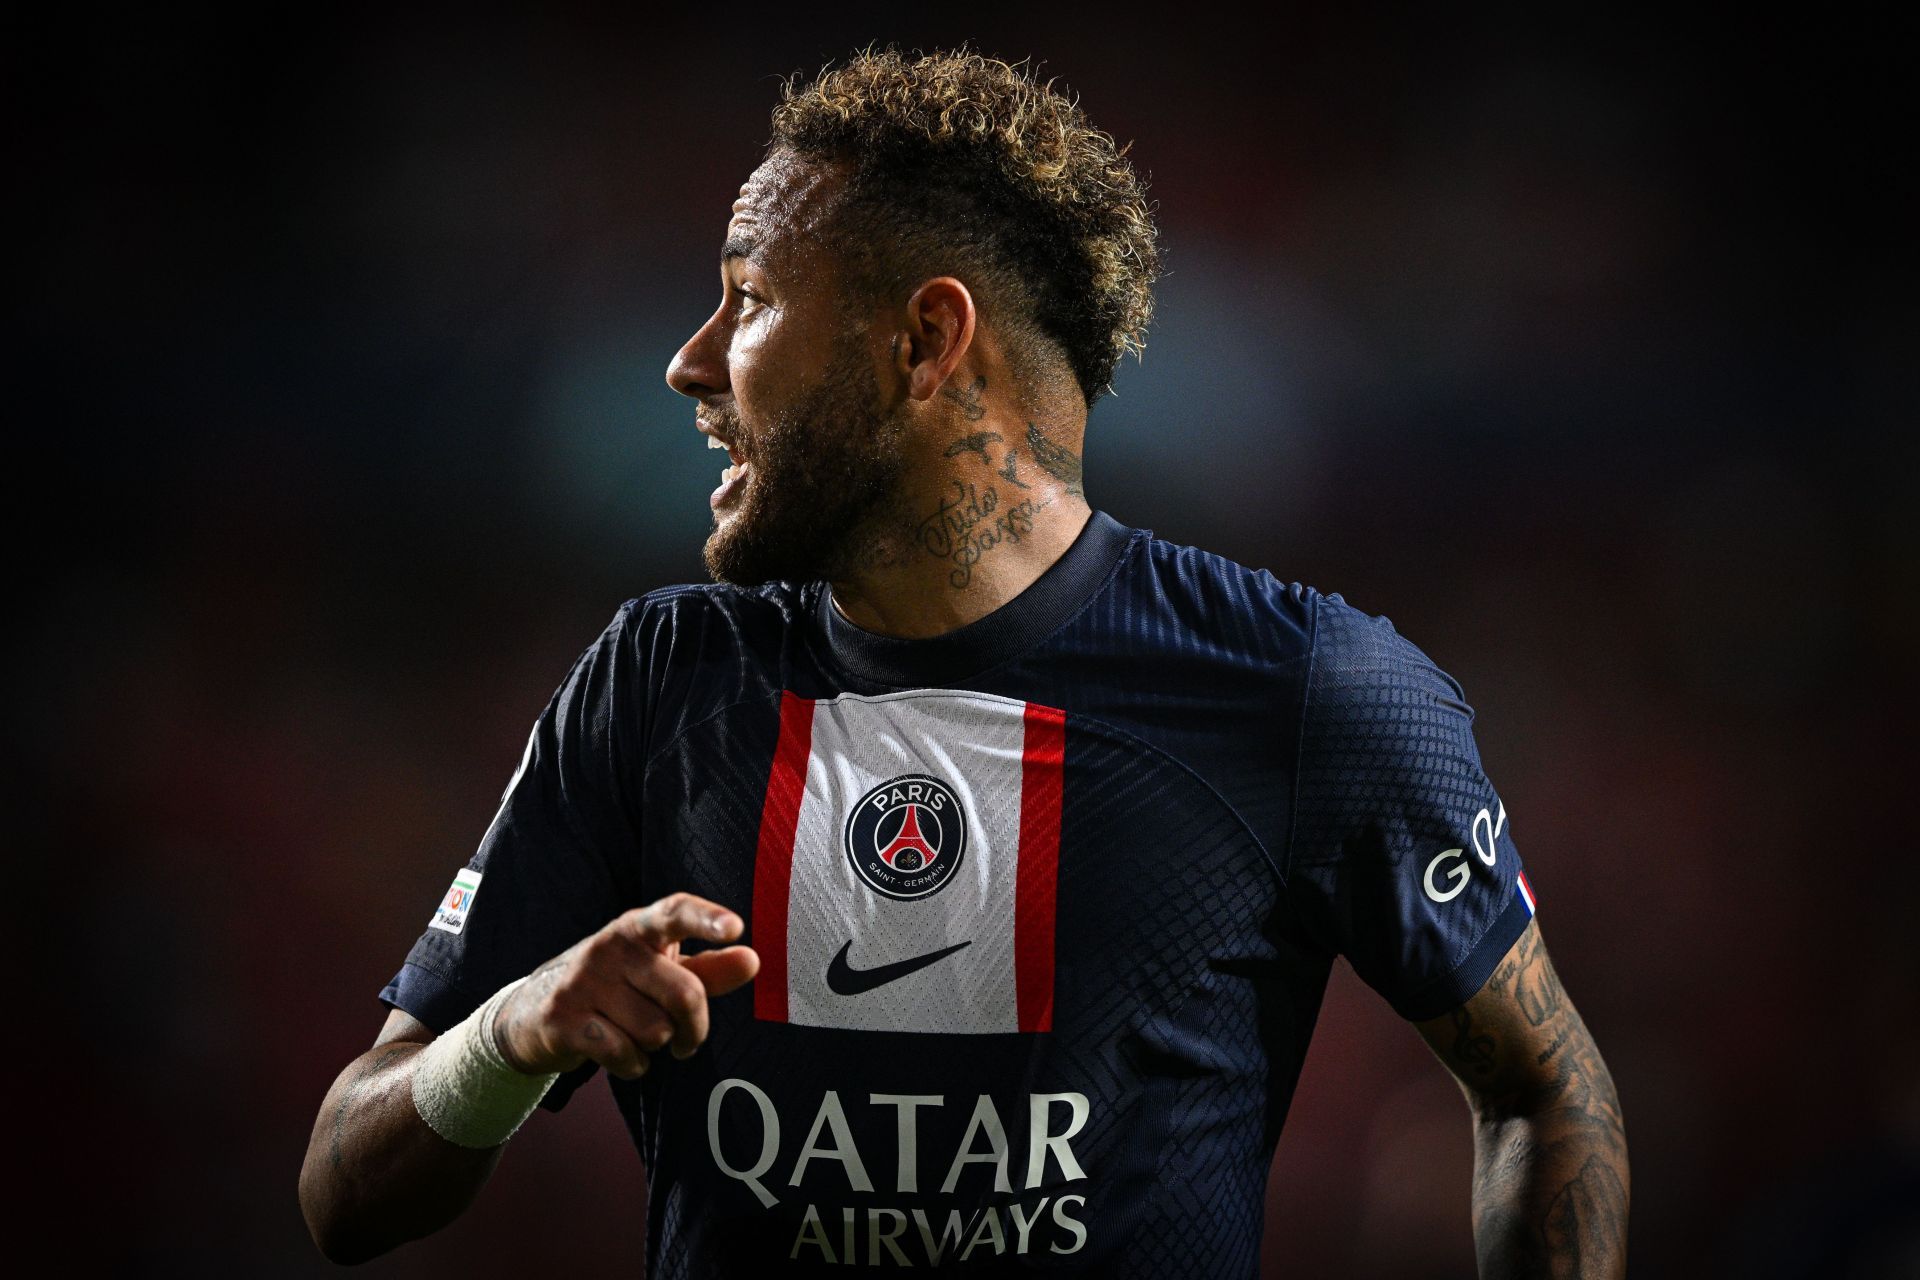 Neymar has been quick off the blocks this campaign for PSG.